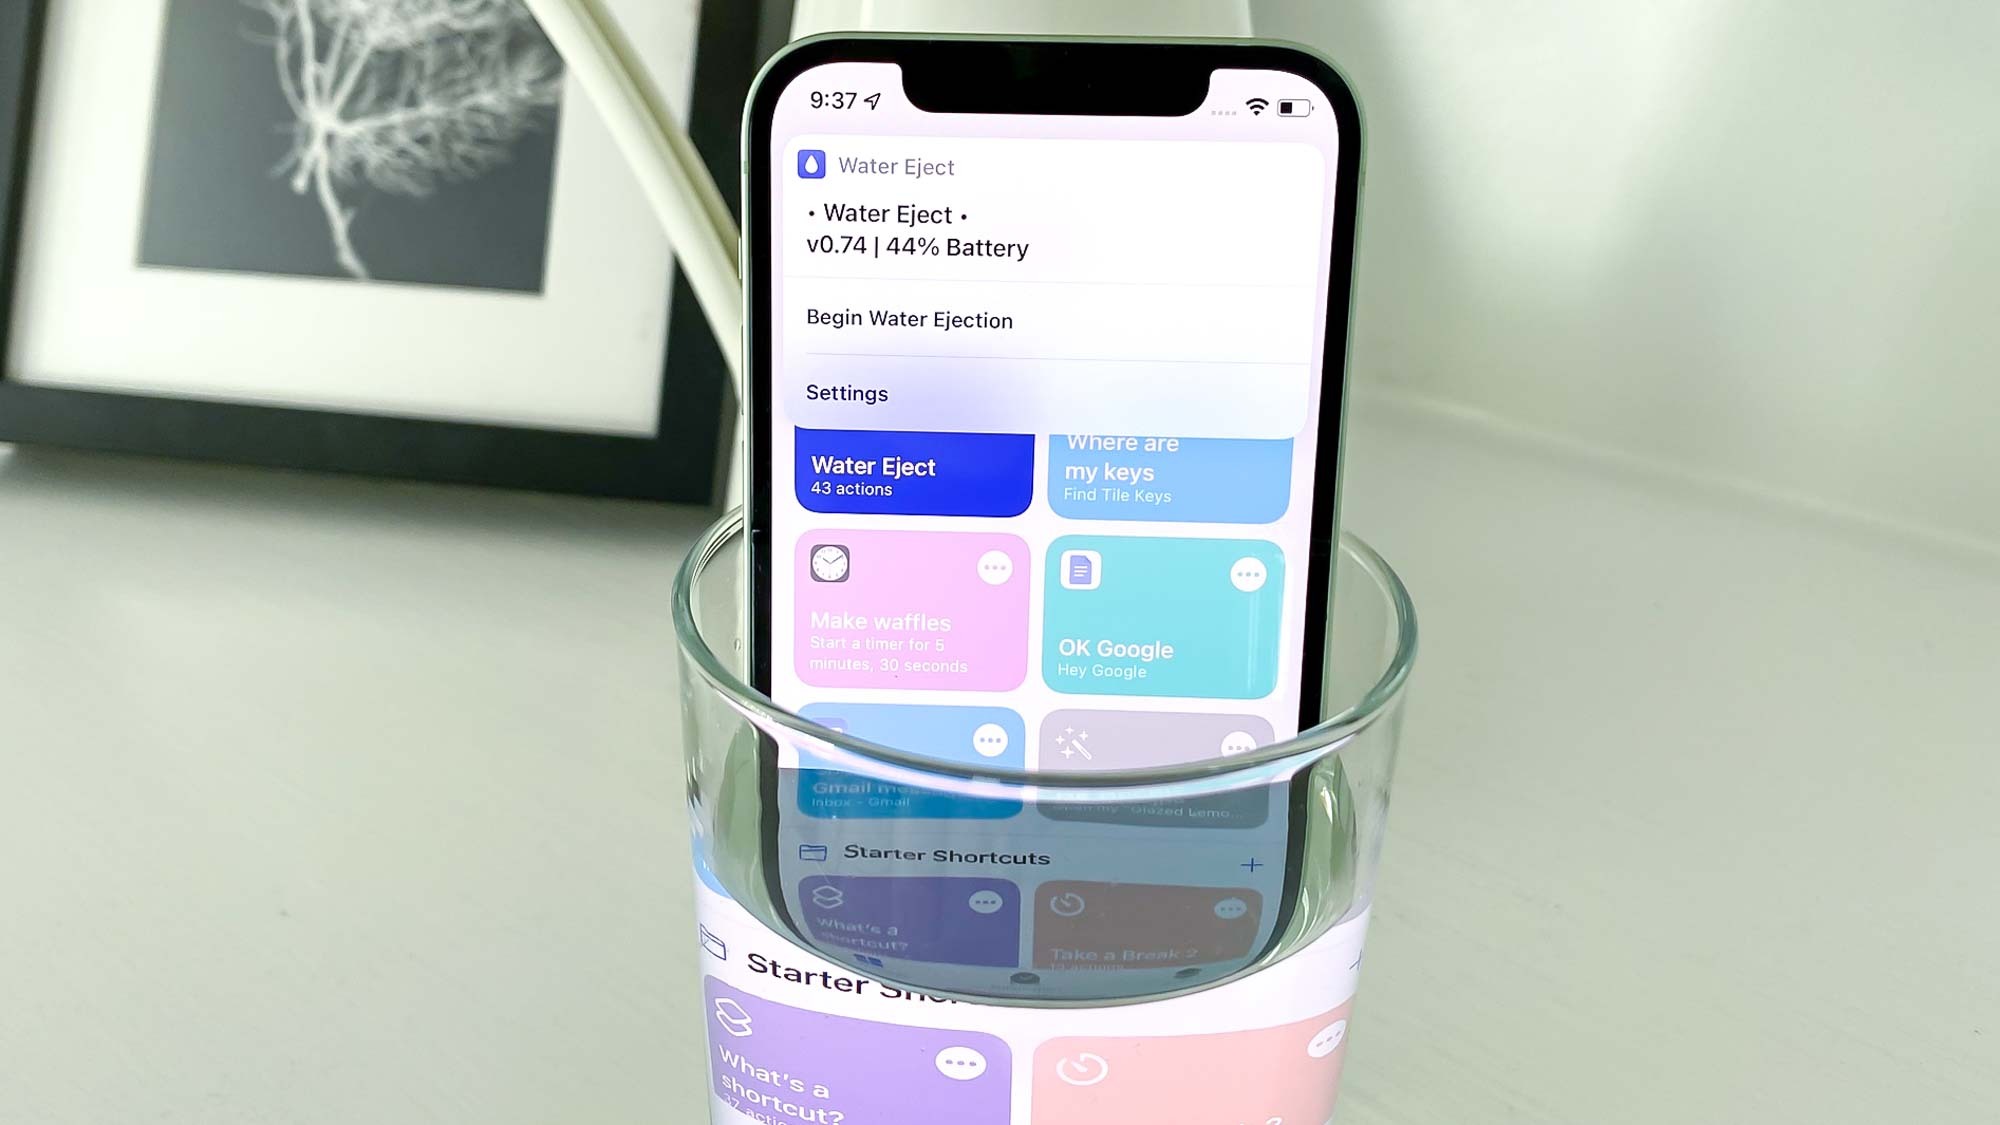 How to remove water from iPhone using shortcuts